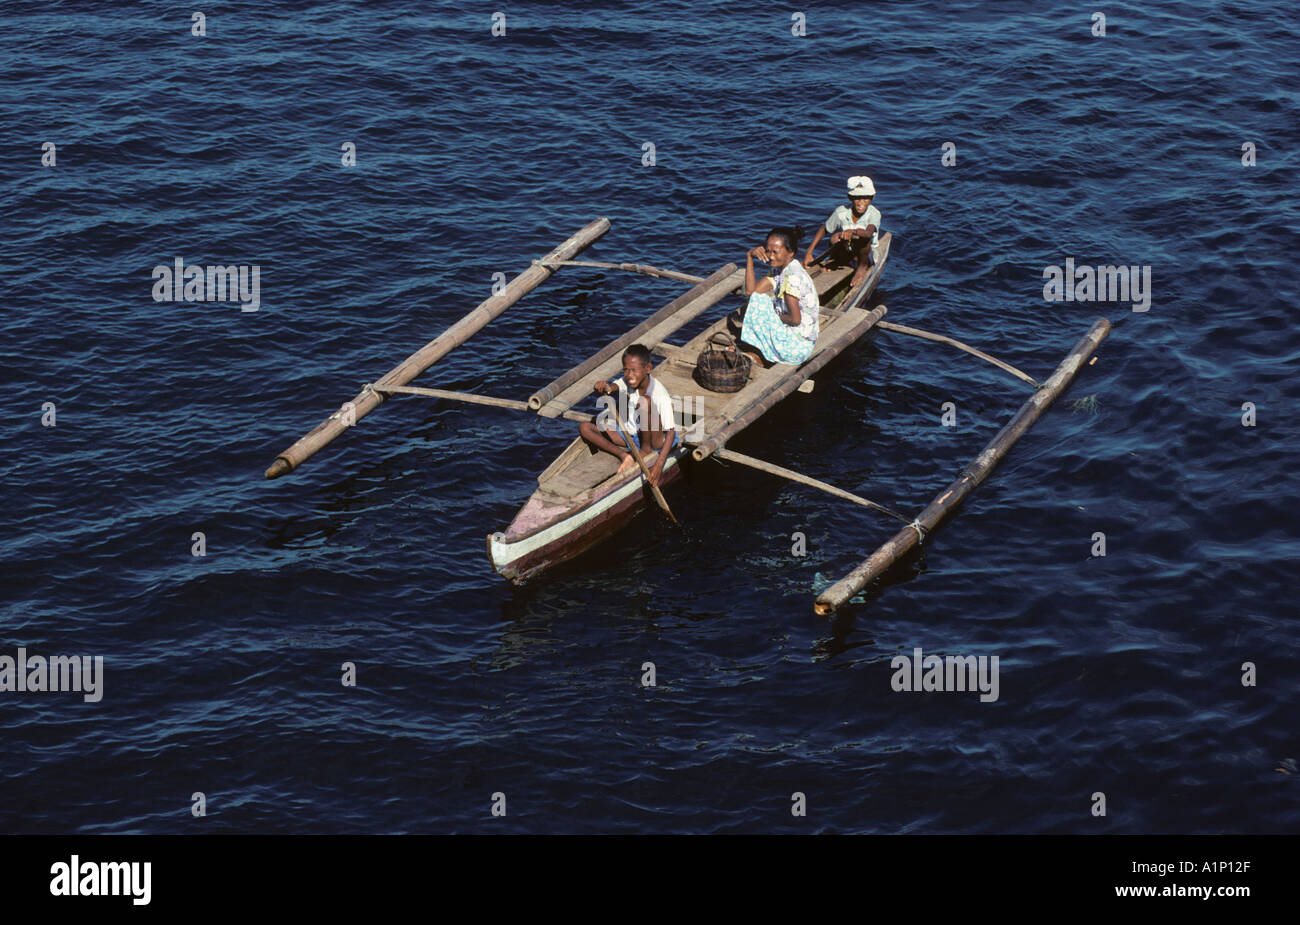 Badjao Badjau or Tau Laut sea gypsies Basilan Island Mindanao Philippines In outrigger canoe Dive for coins thrown into the wate Stock Photo